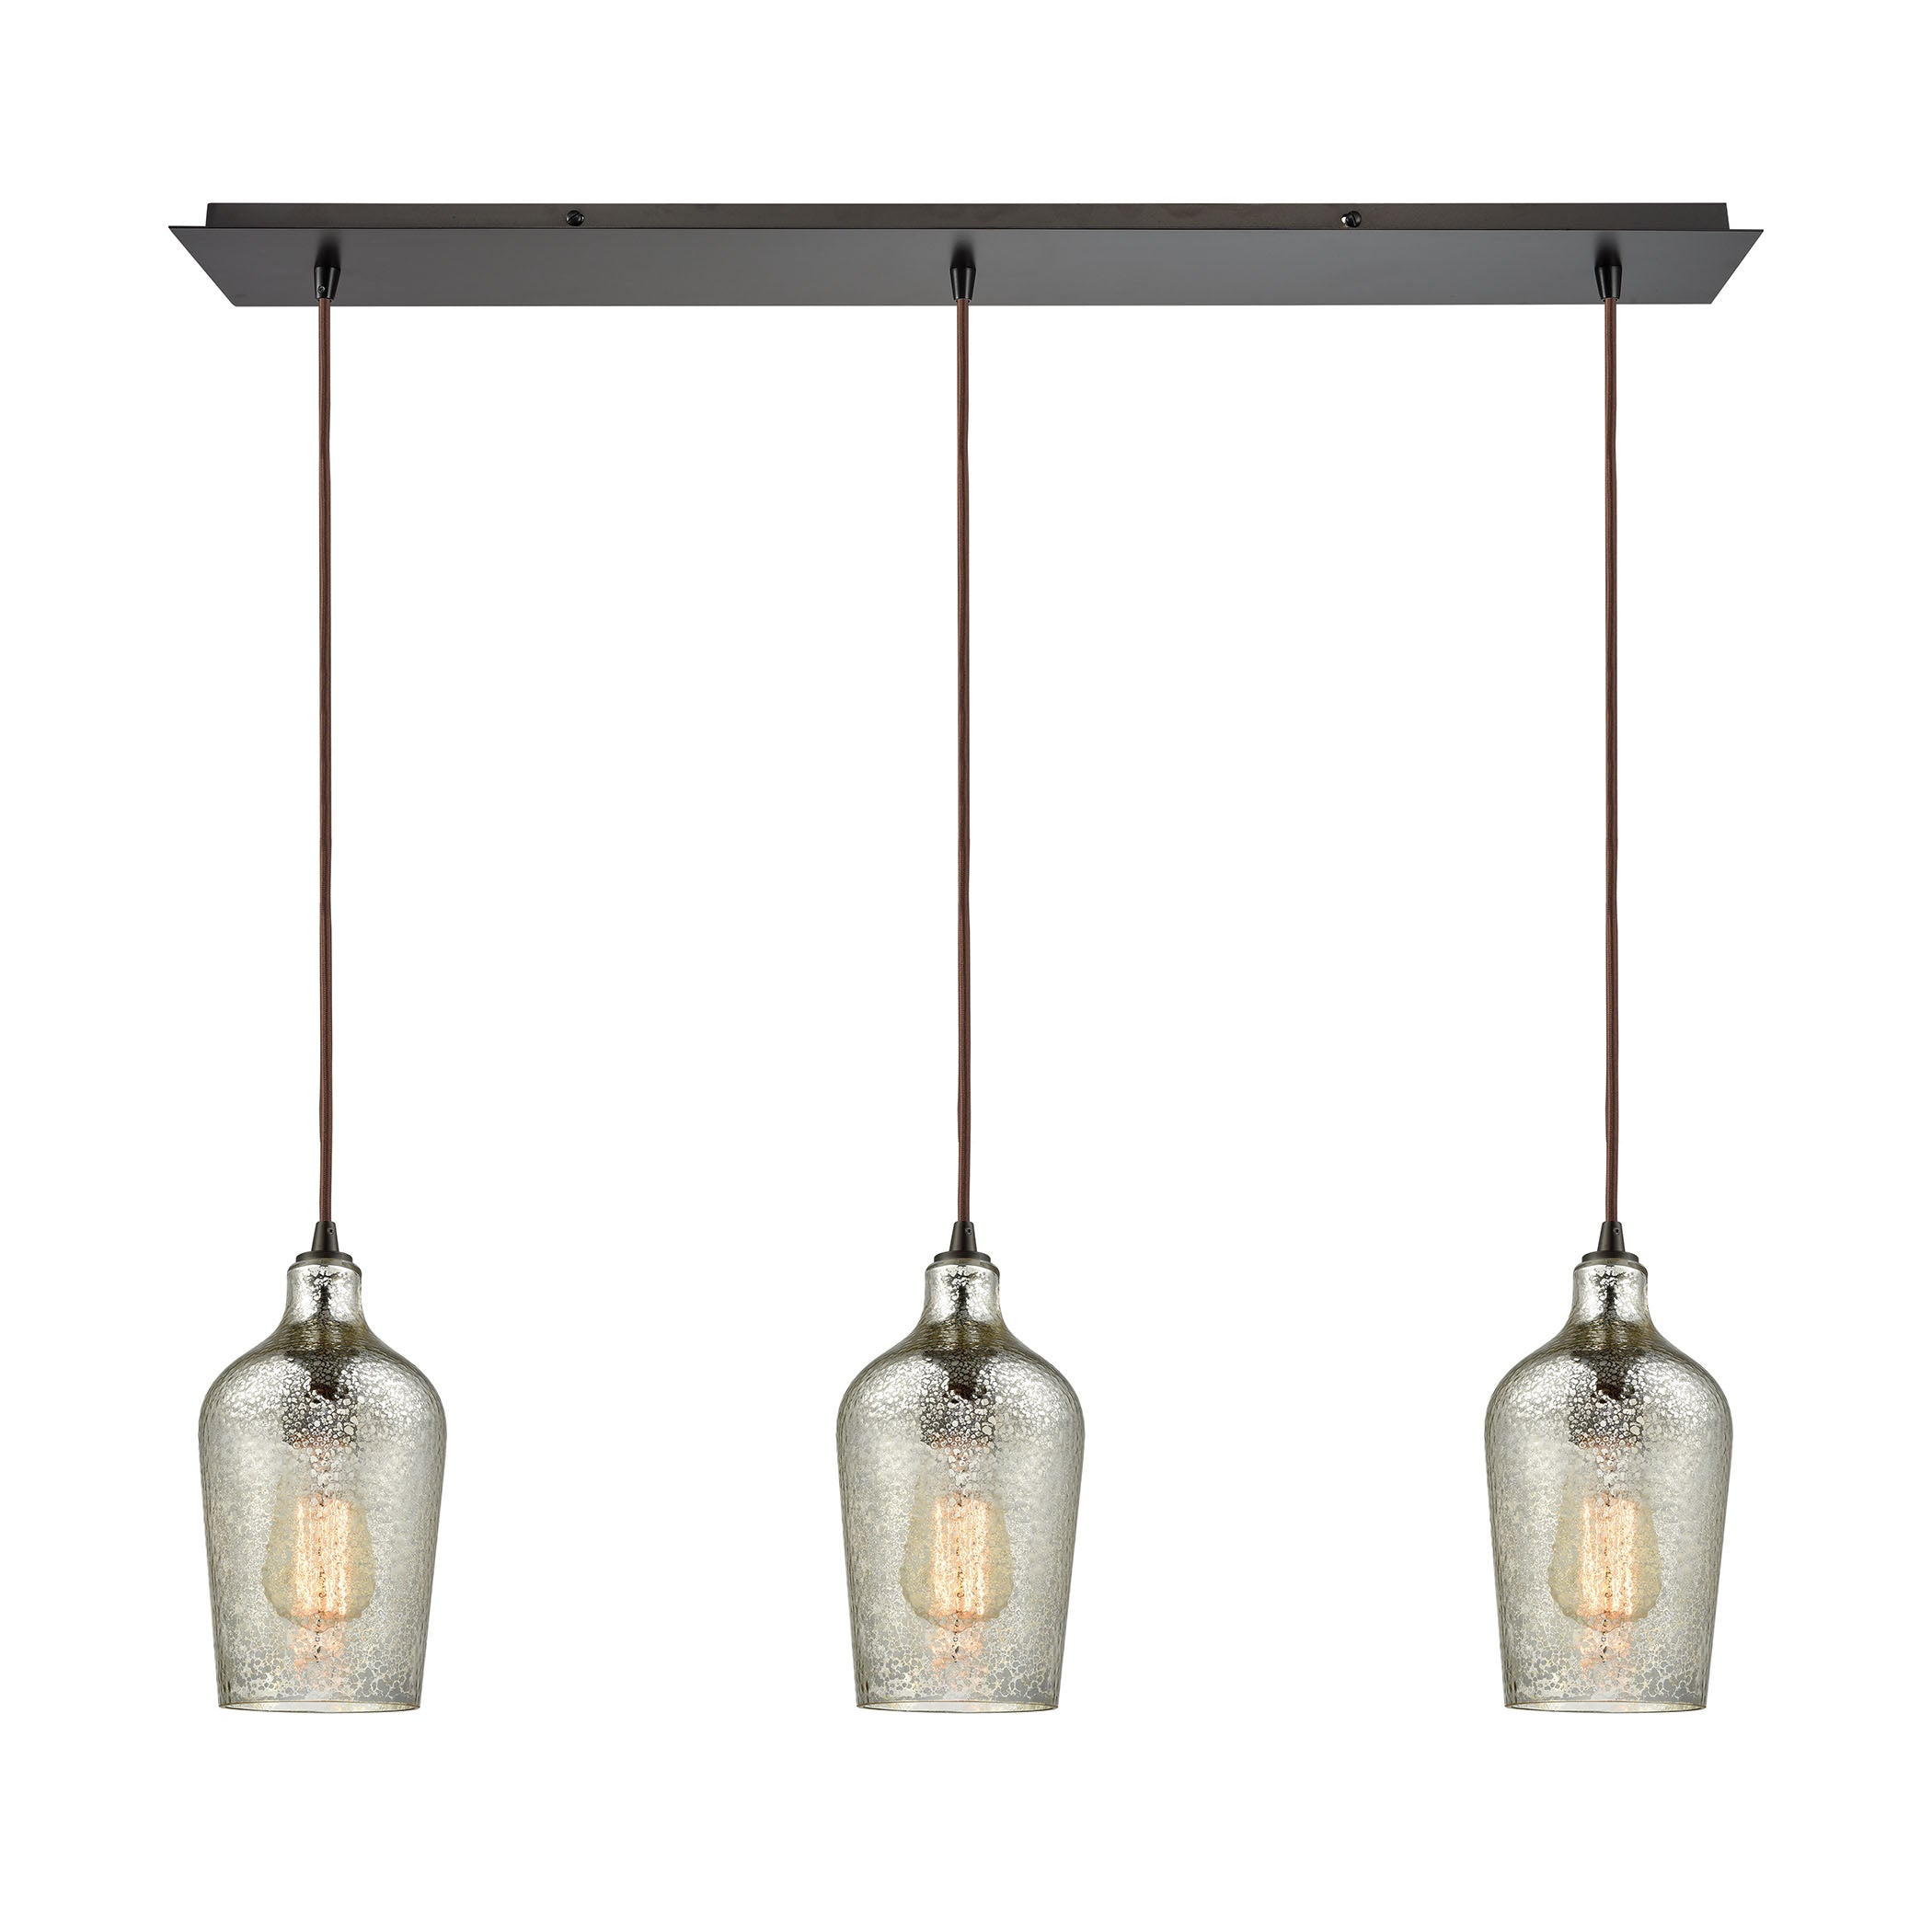 ELK Lighting 10830/3LP Hammered Glass 3-Light Linear Mini Pendant Fixture in Oiled Bronze with Hammered Mercury Glass